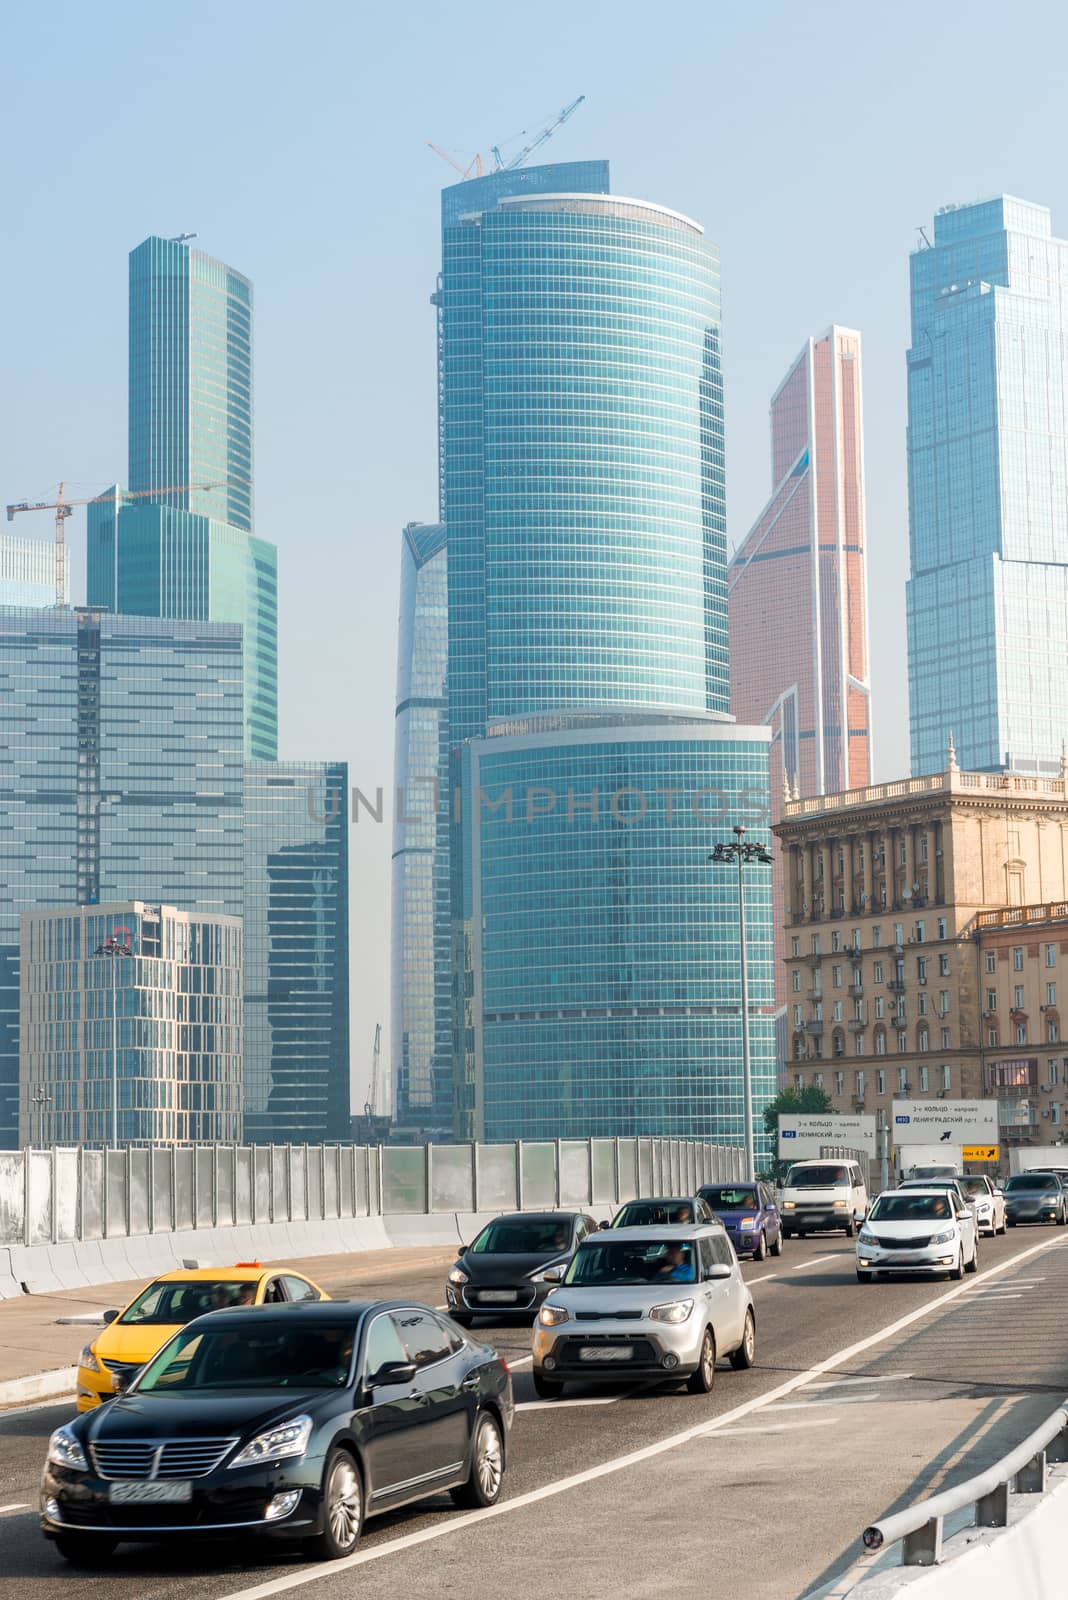 Skyscrapers and highways, Moscow City skyline, road traffic by kosmsos111